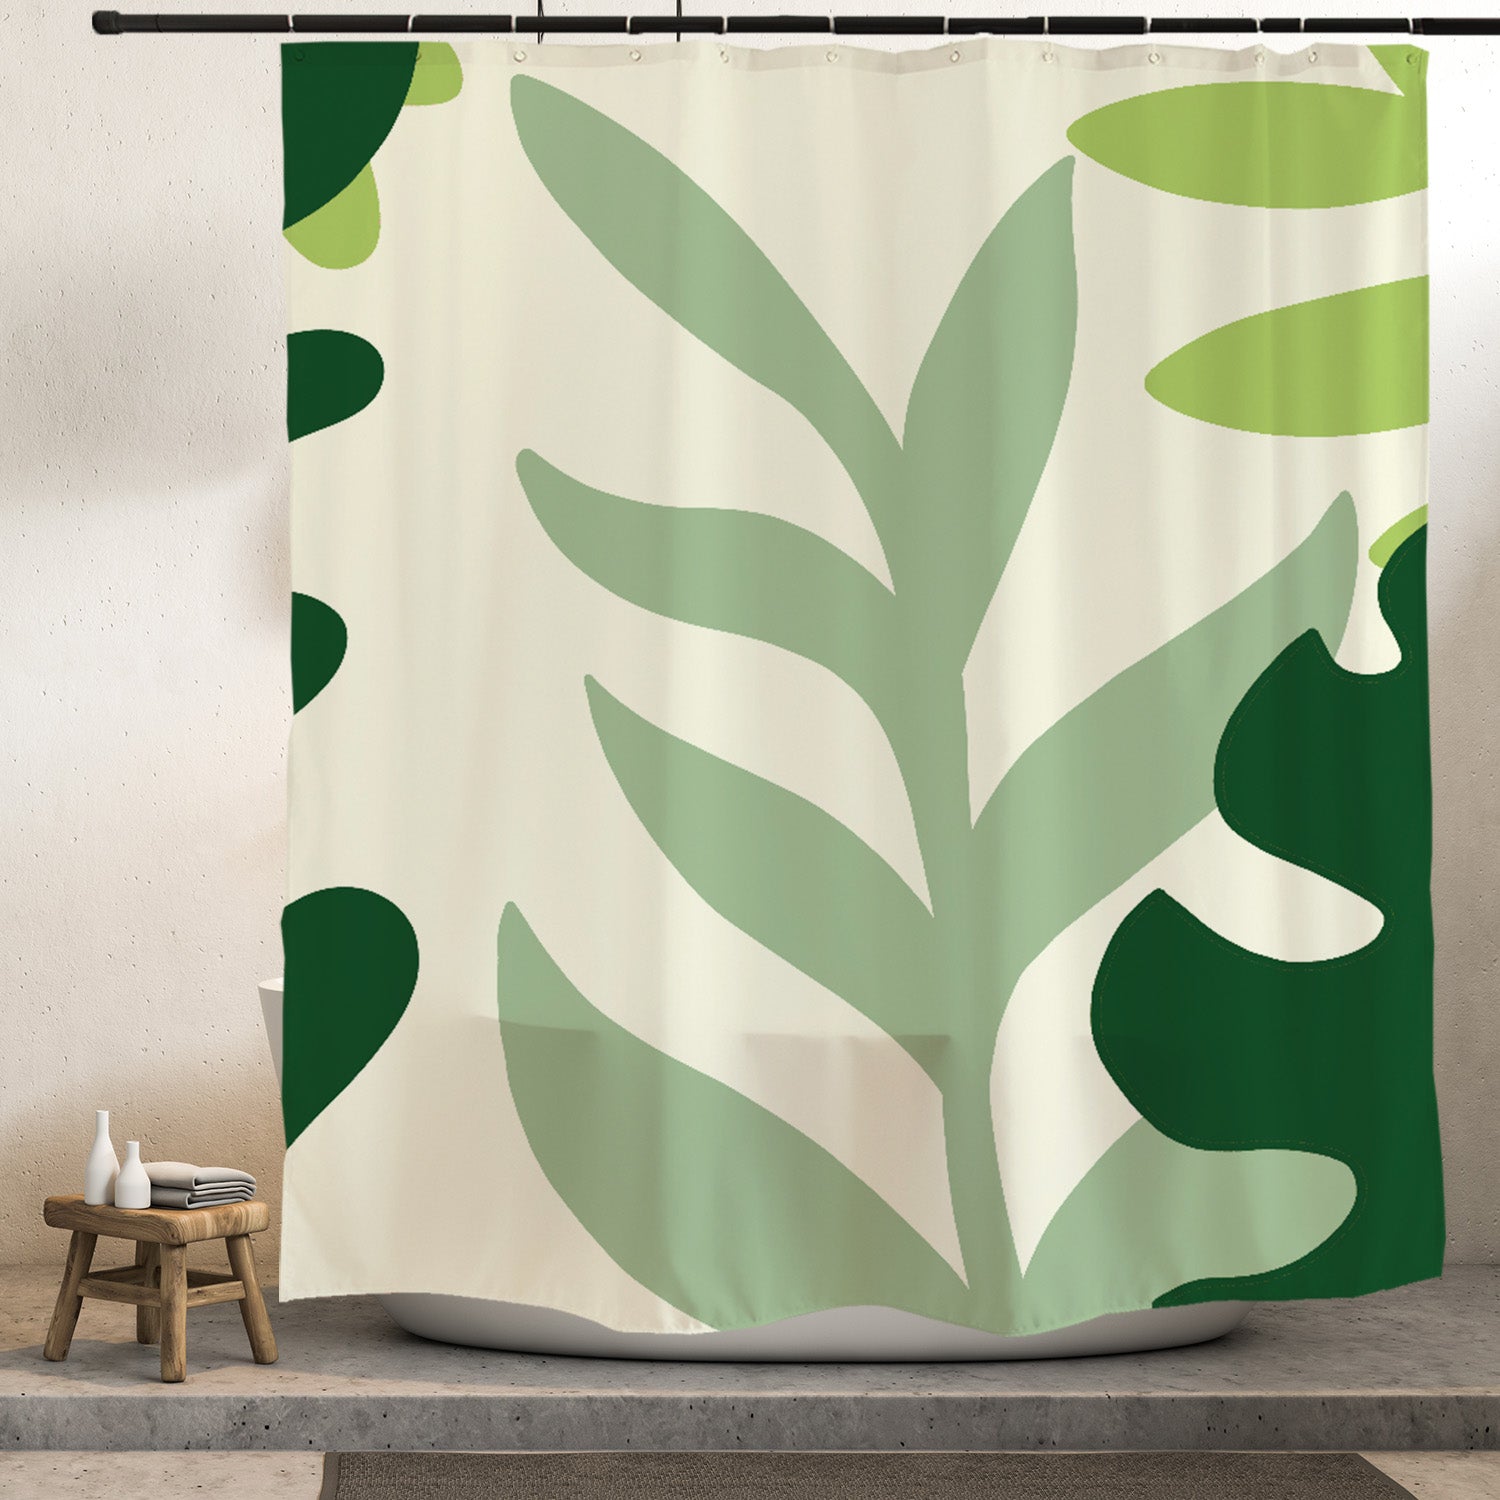 Feblilac Green Leaves Shower Curtain with Hooks